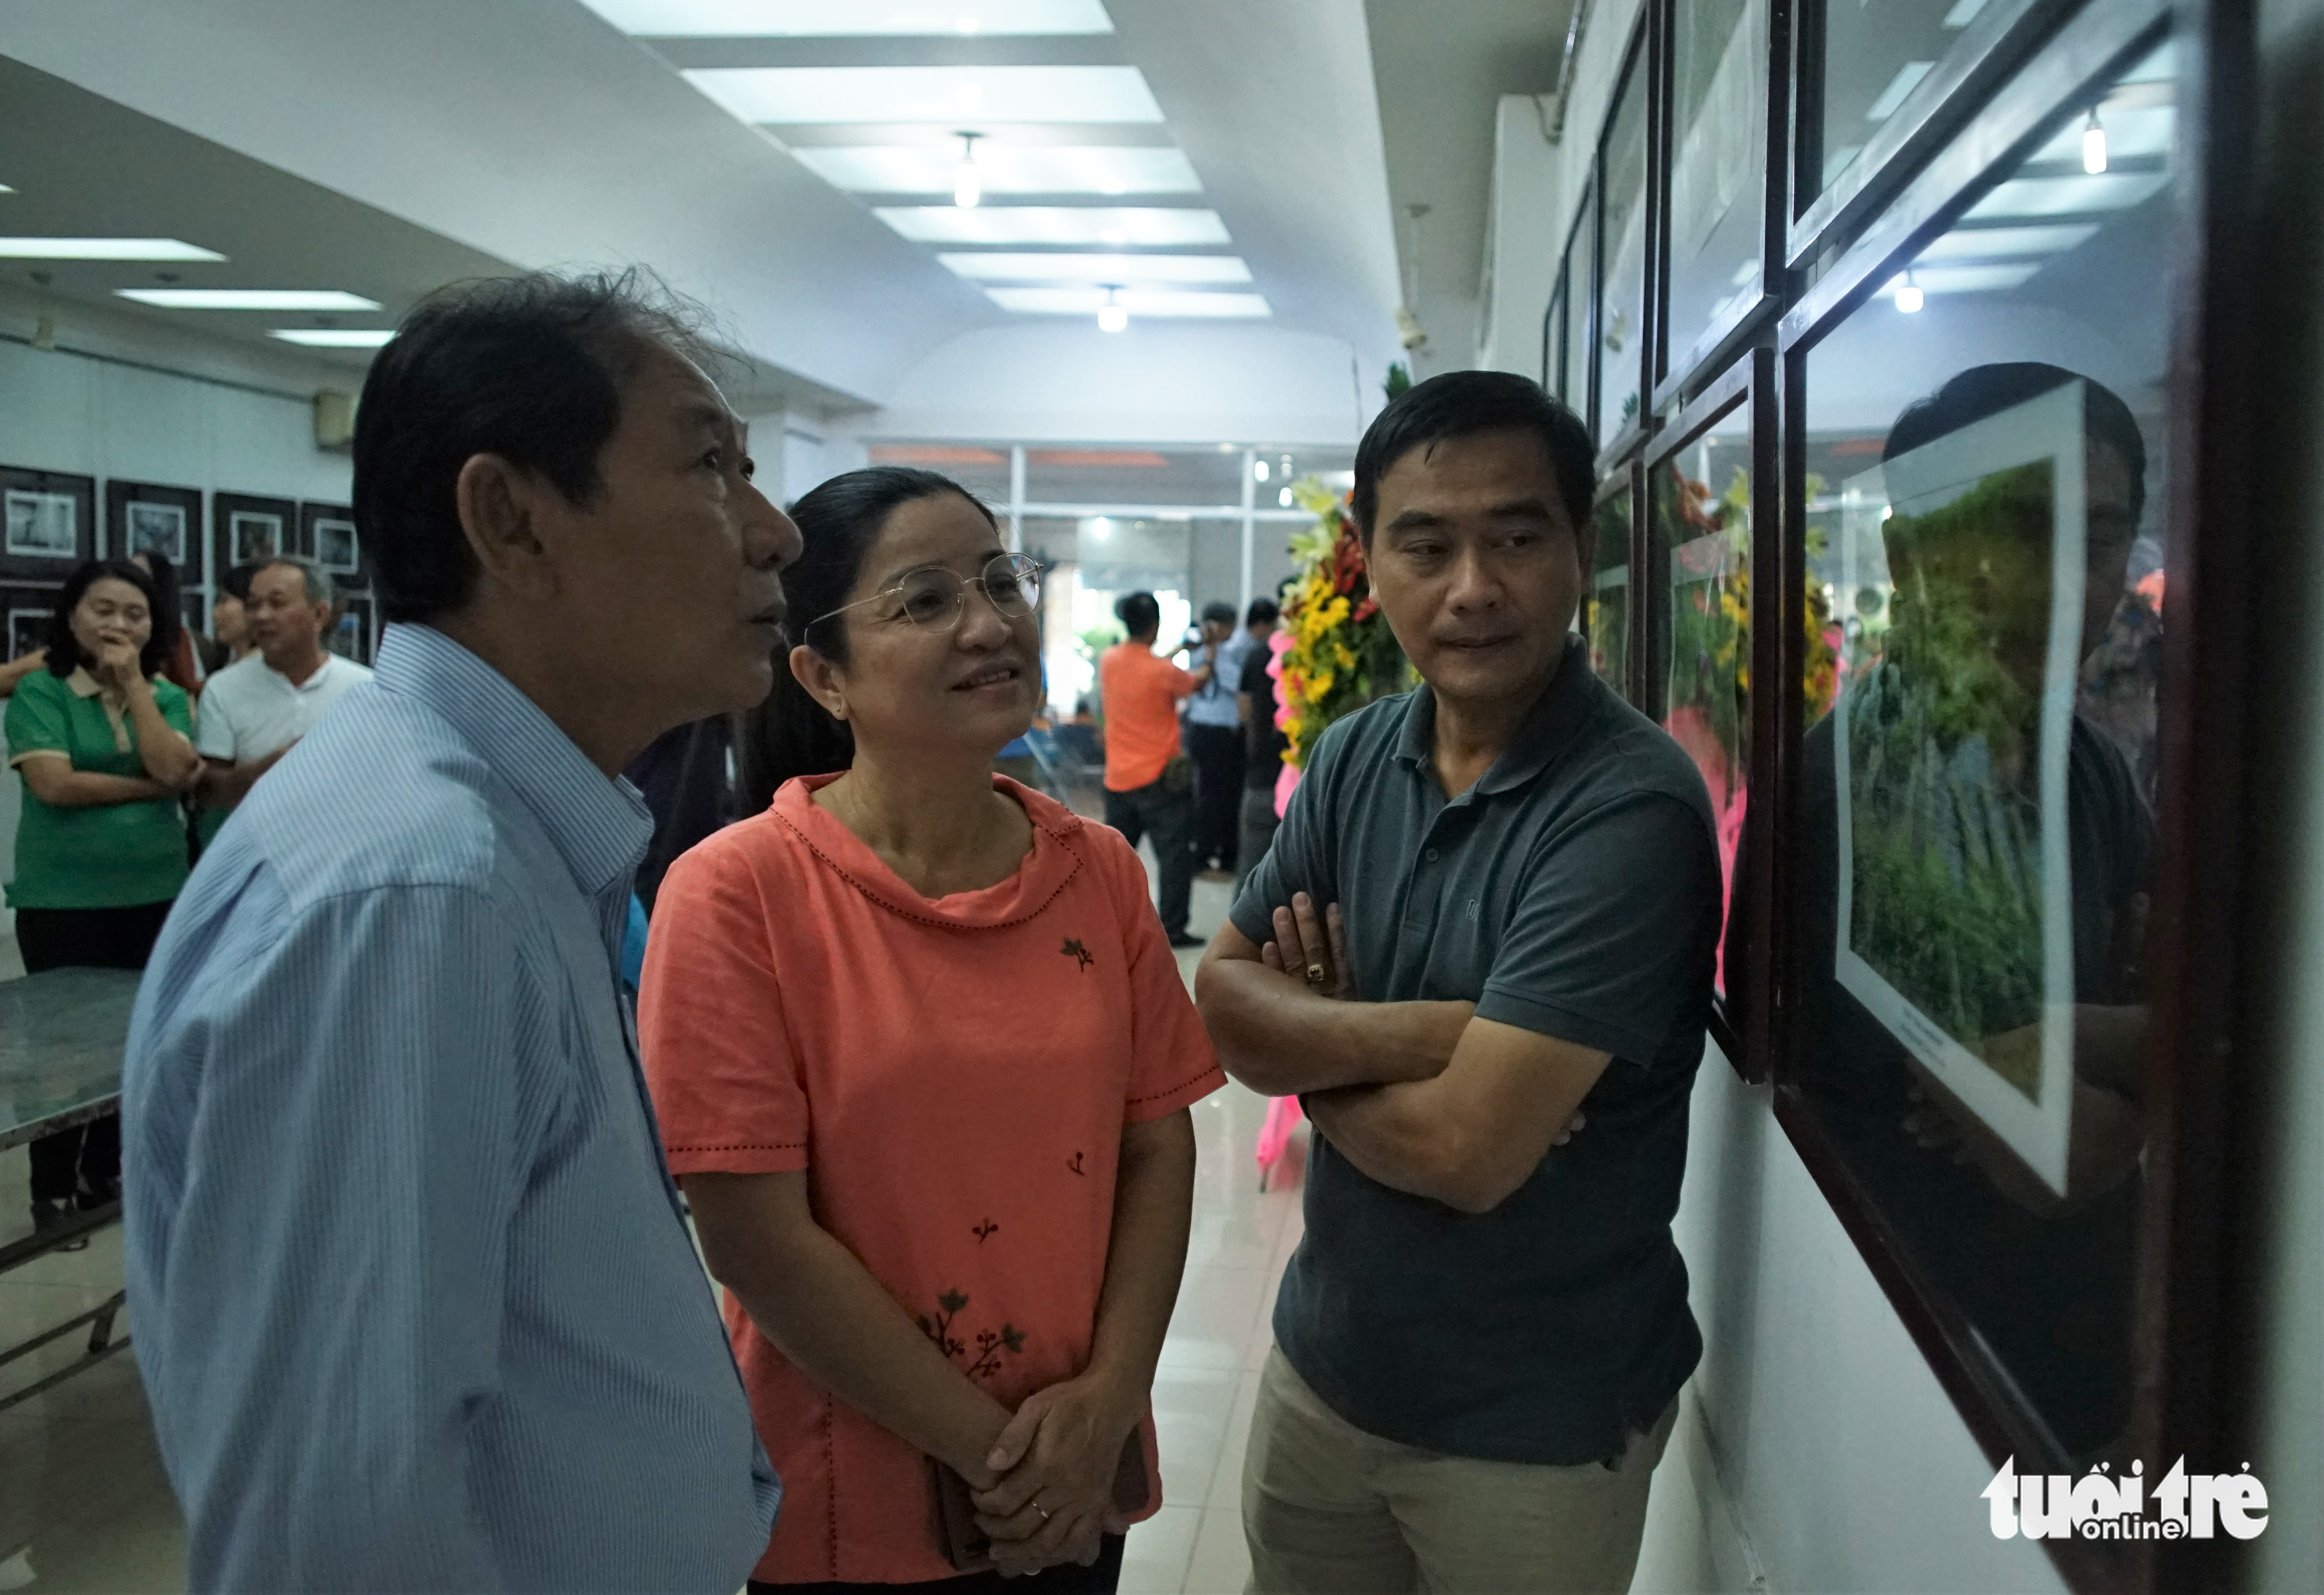 Visitors admire a photo of ‘non la’ on display at the Ho Chi Minh City Photography Association (HOPA) headquarters. Photo: Huynh Vy / Tuoi Tre